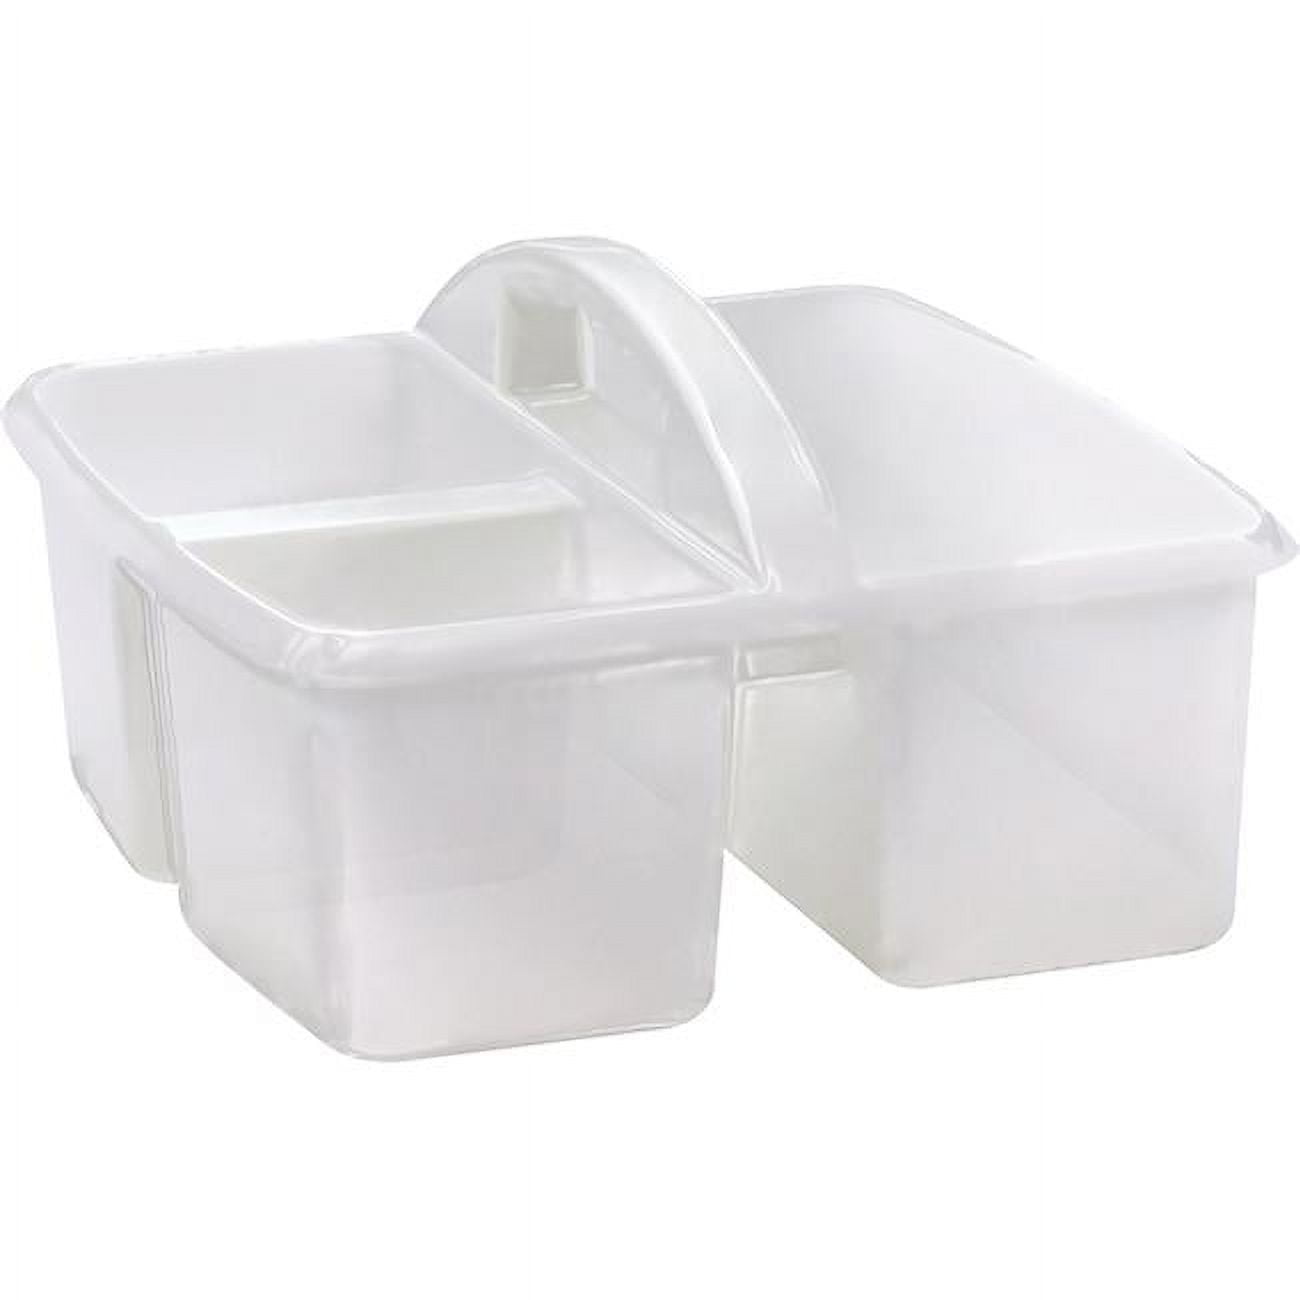 Red Large Plastic Storage Bin 6 Pack - by TCR